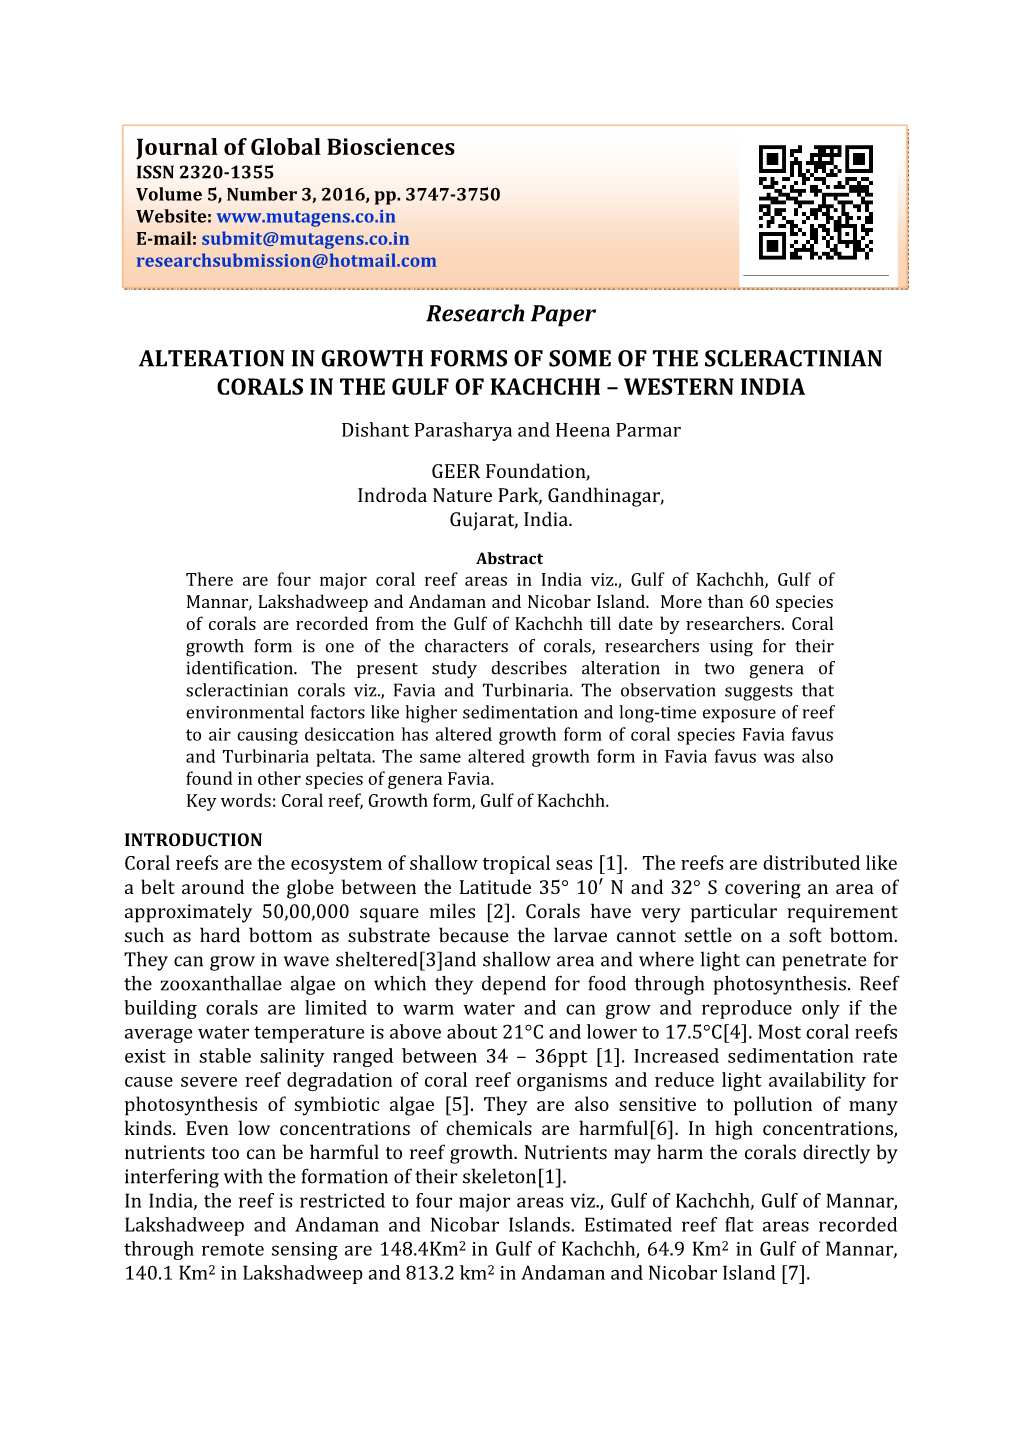 Research Paper ALTERATION in GROWTH FORMS of SOME of the SCLERACTINIAN CORALS in the GULF of KACHCHH – WESTERN INDIA Dishant Parasharya and Heena Parmar